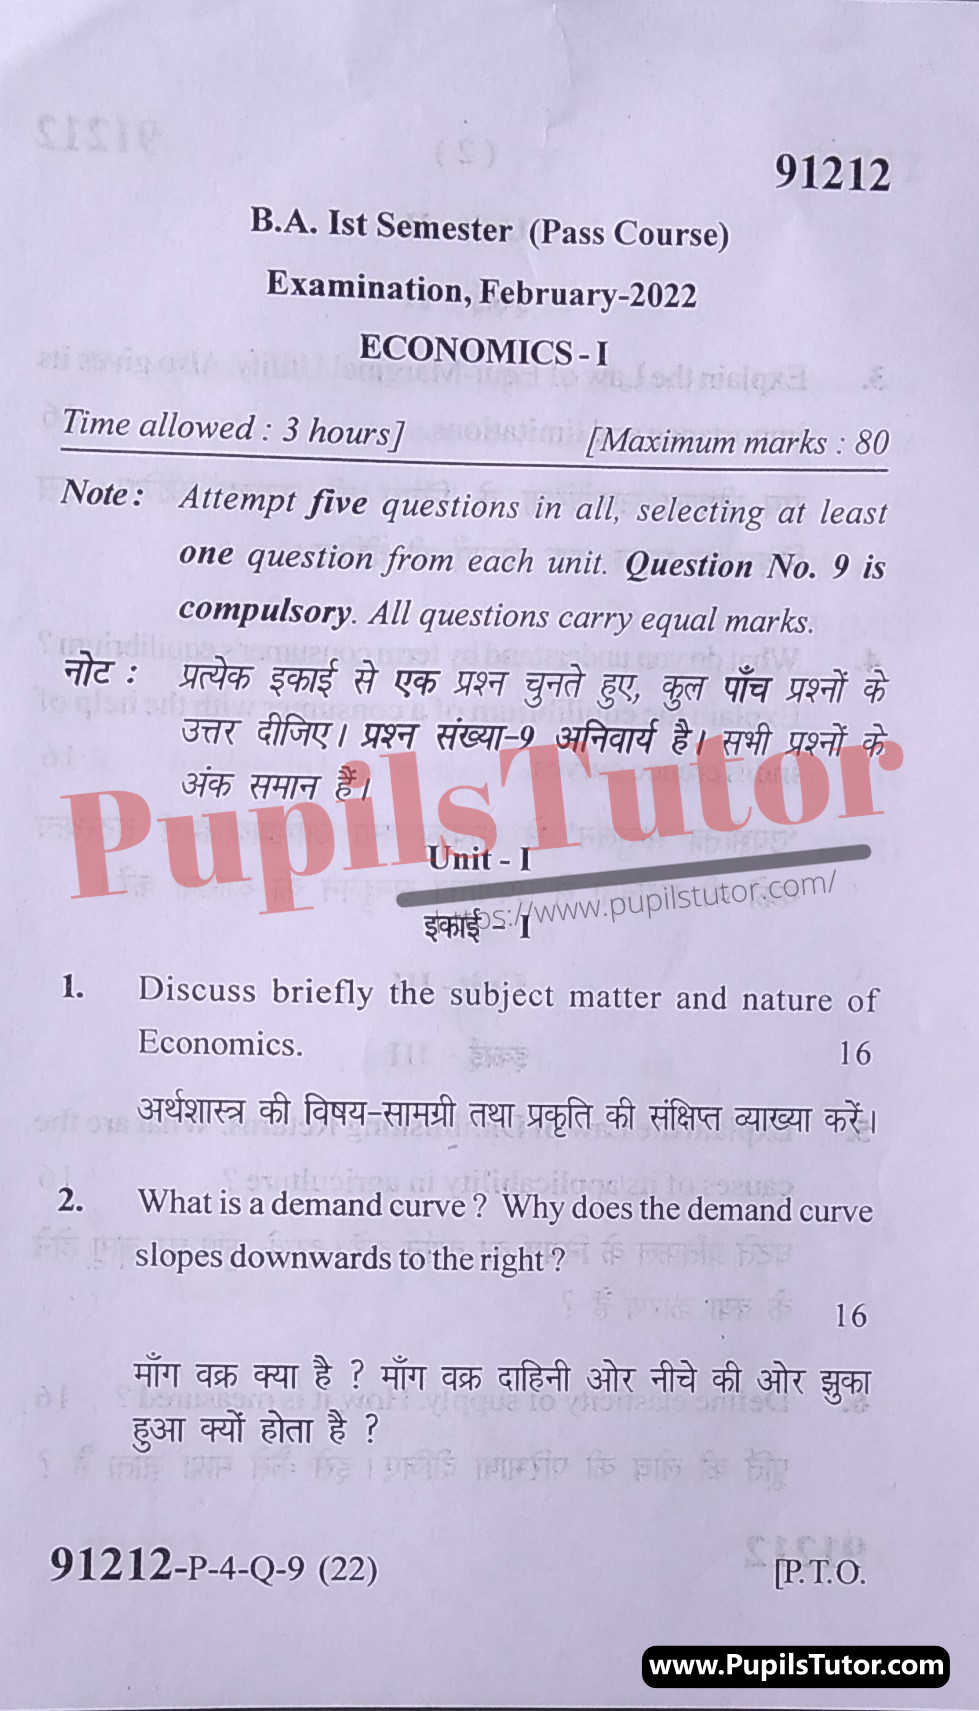 MDU (Maharshi Dayanand University, Rohtak Haryana) BA Pass Course First Semester Previous Year Economics Question Paper For February, 2022 Exam (Question Paper Page 1) - pupilstutor.com